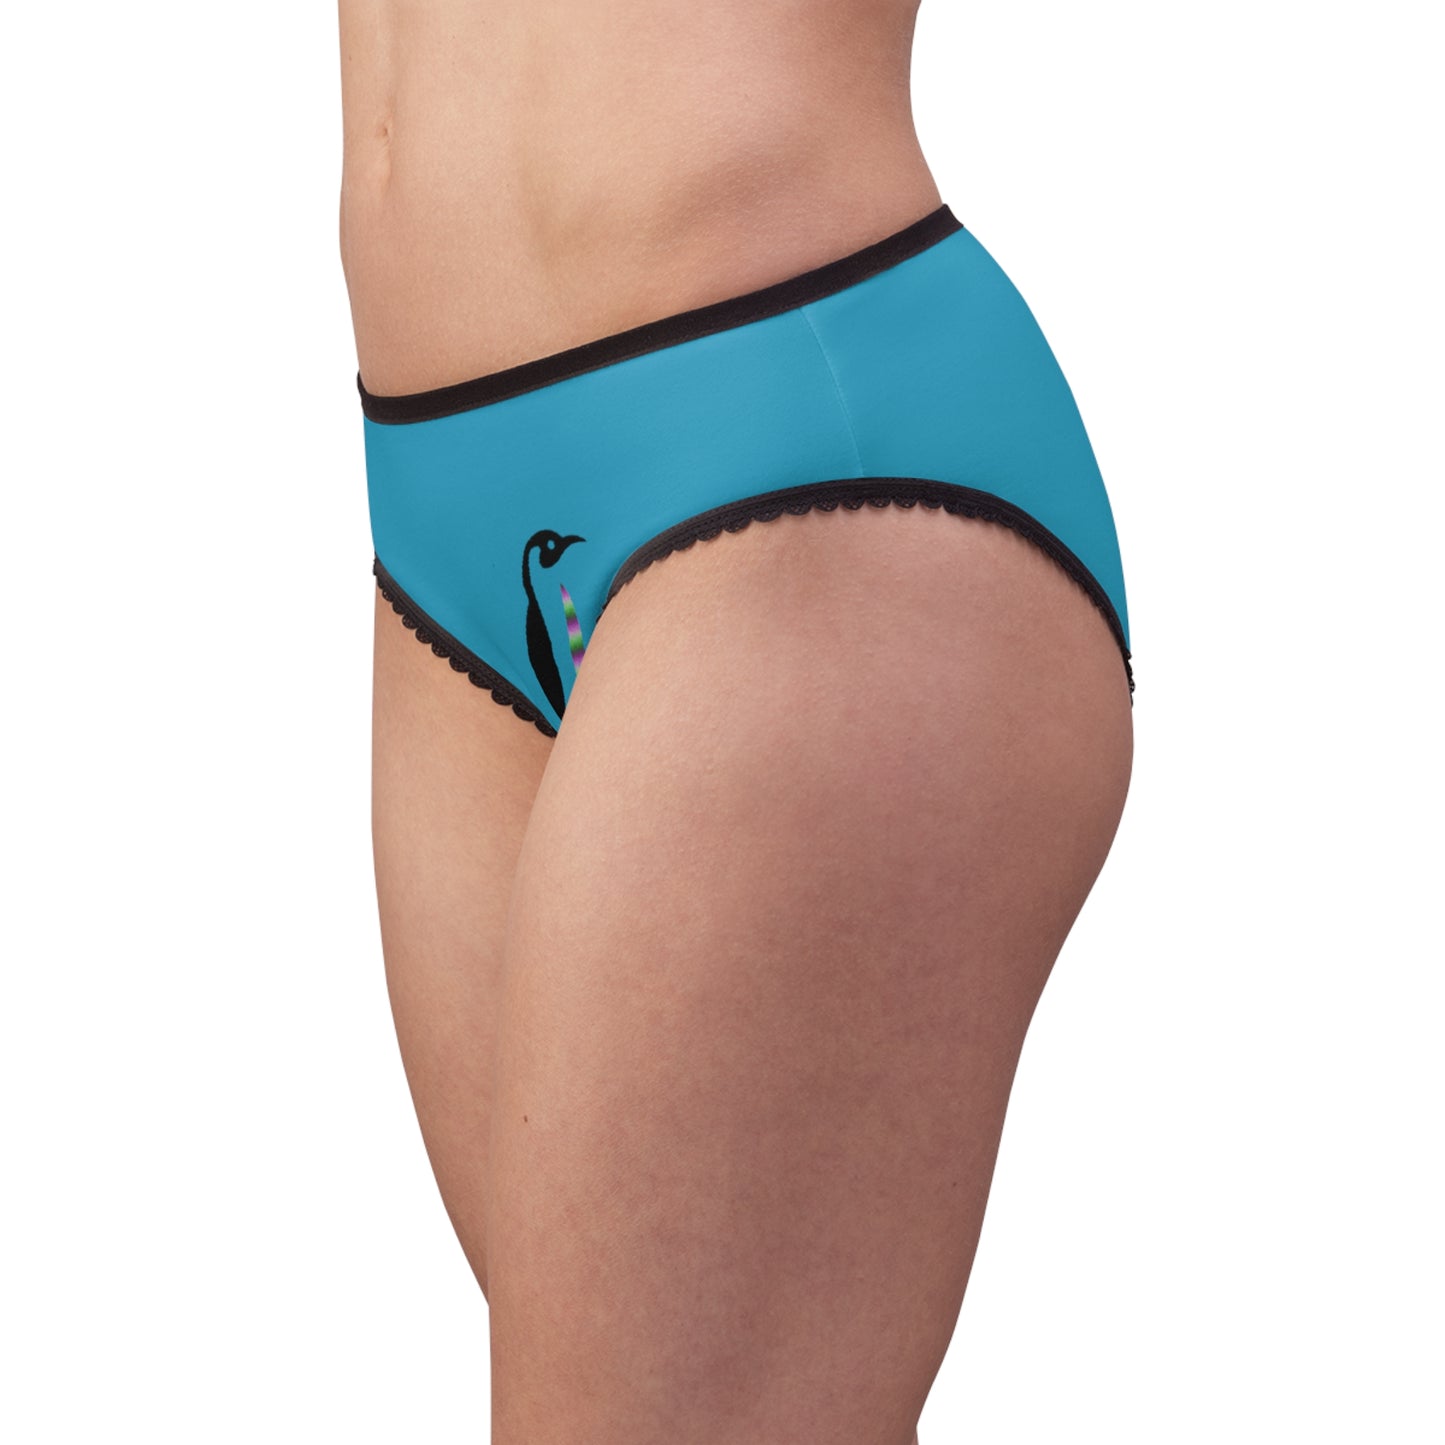 Women's Briefs: Bowling Turquoise